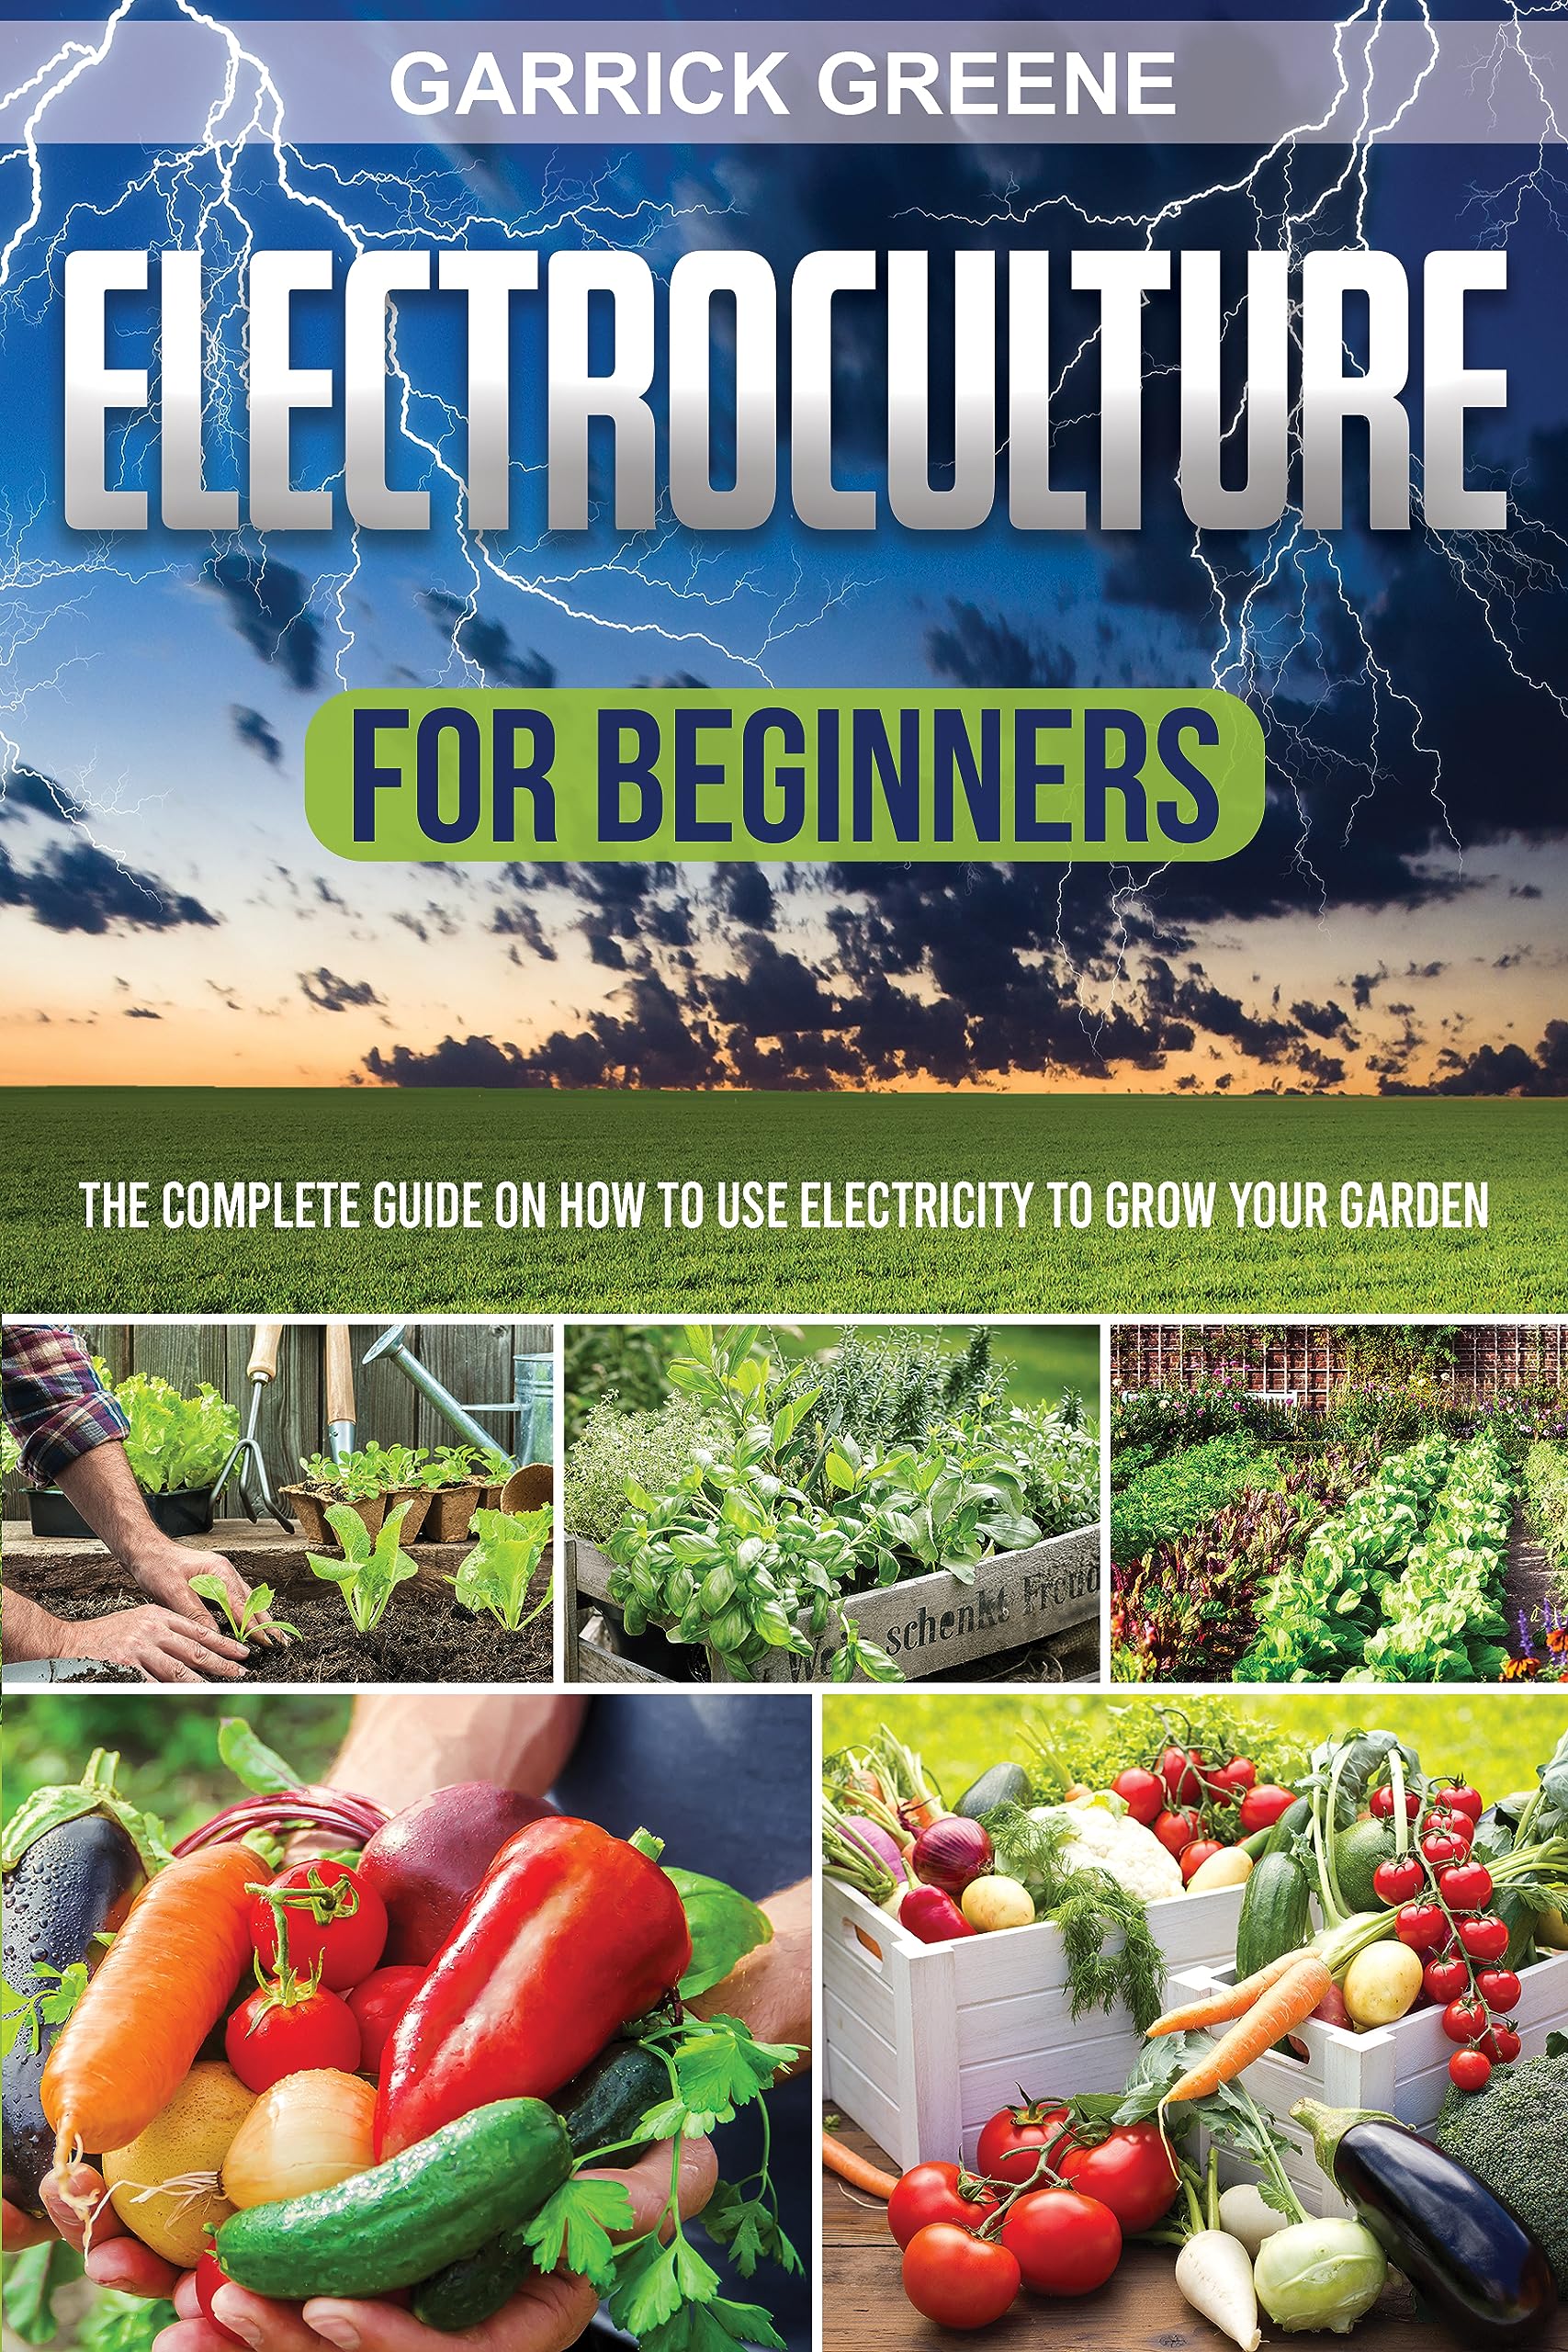 Electroculture For Beginners: The Complete Guide on How to Use Electricity to Grow Your Garden